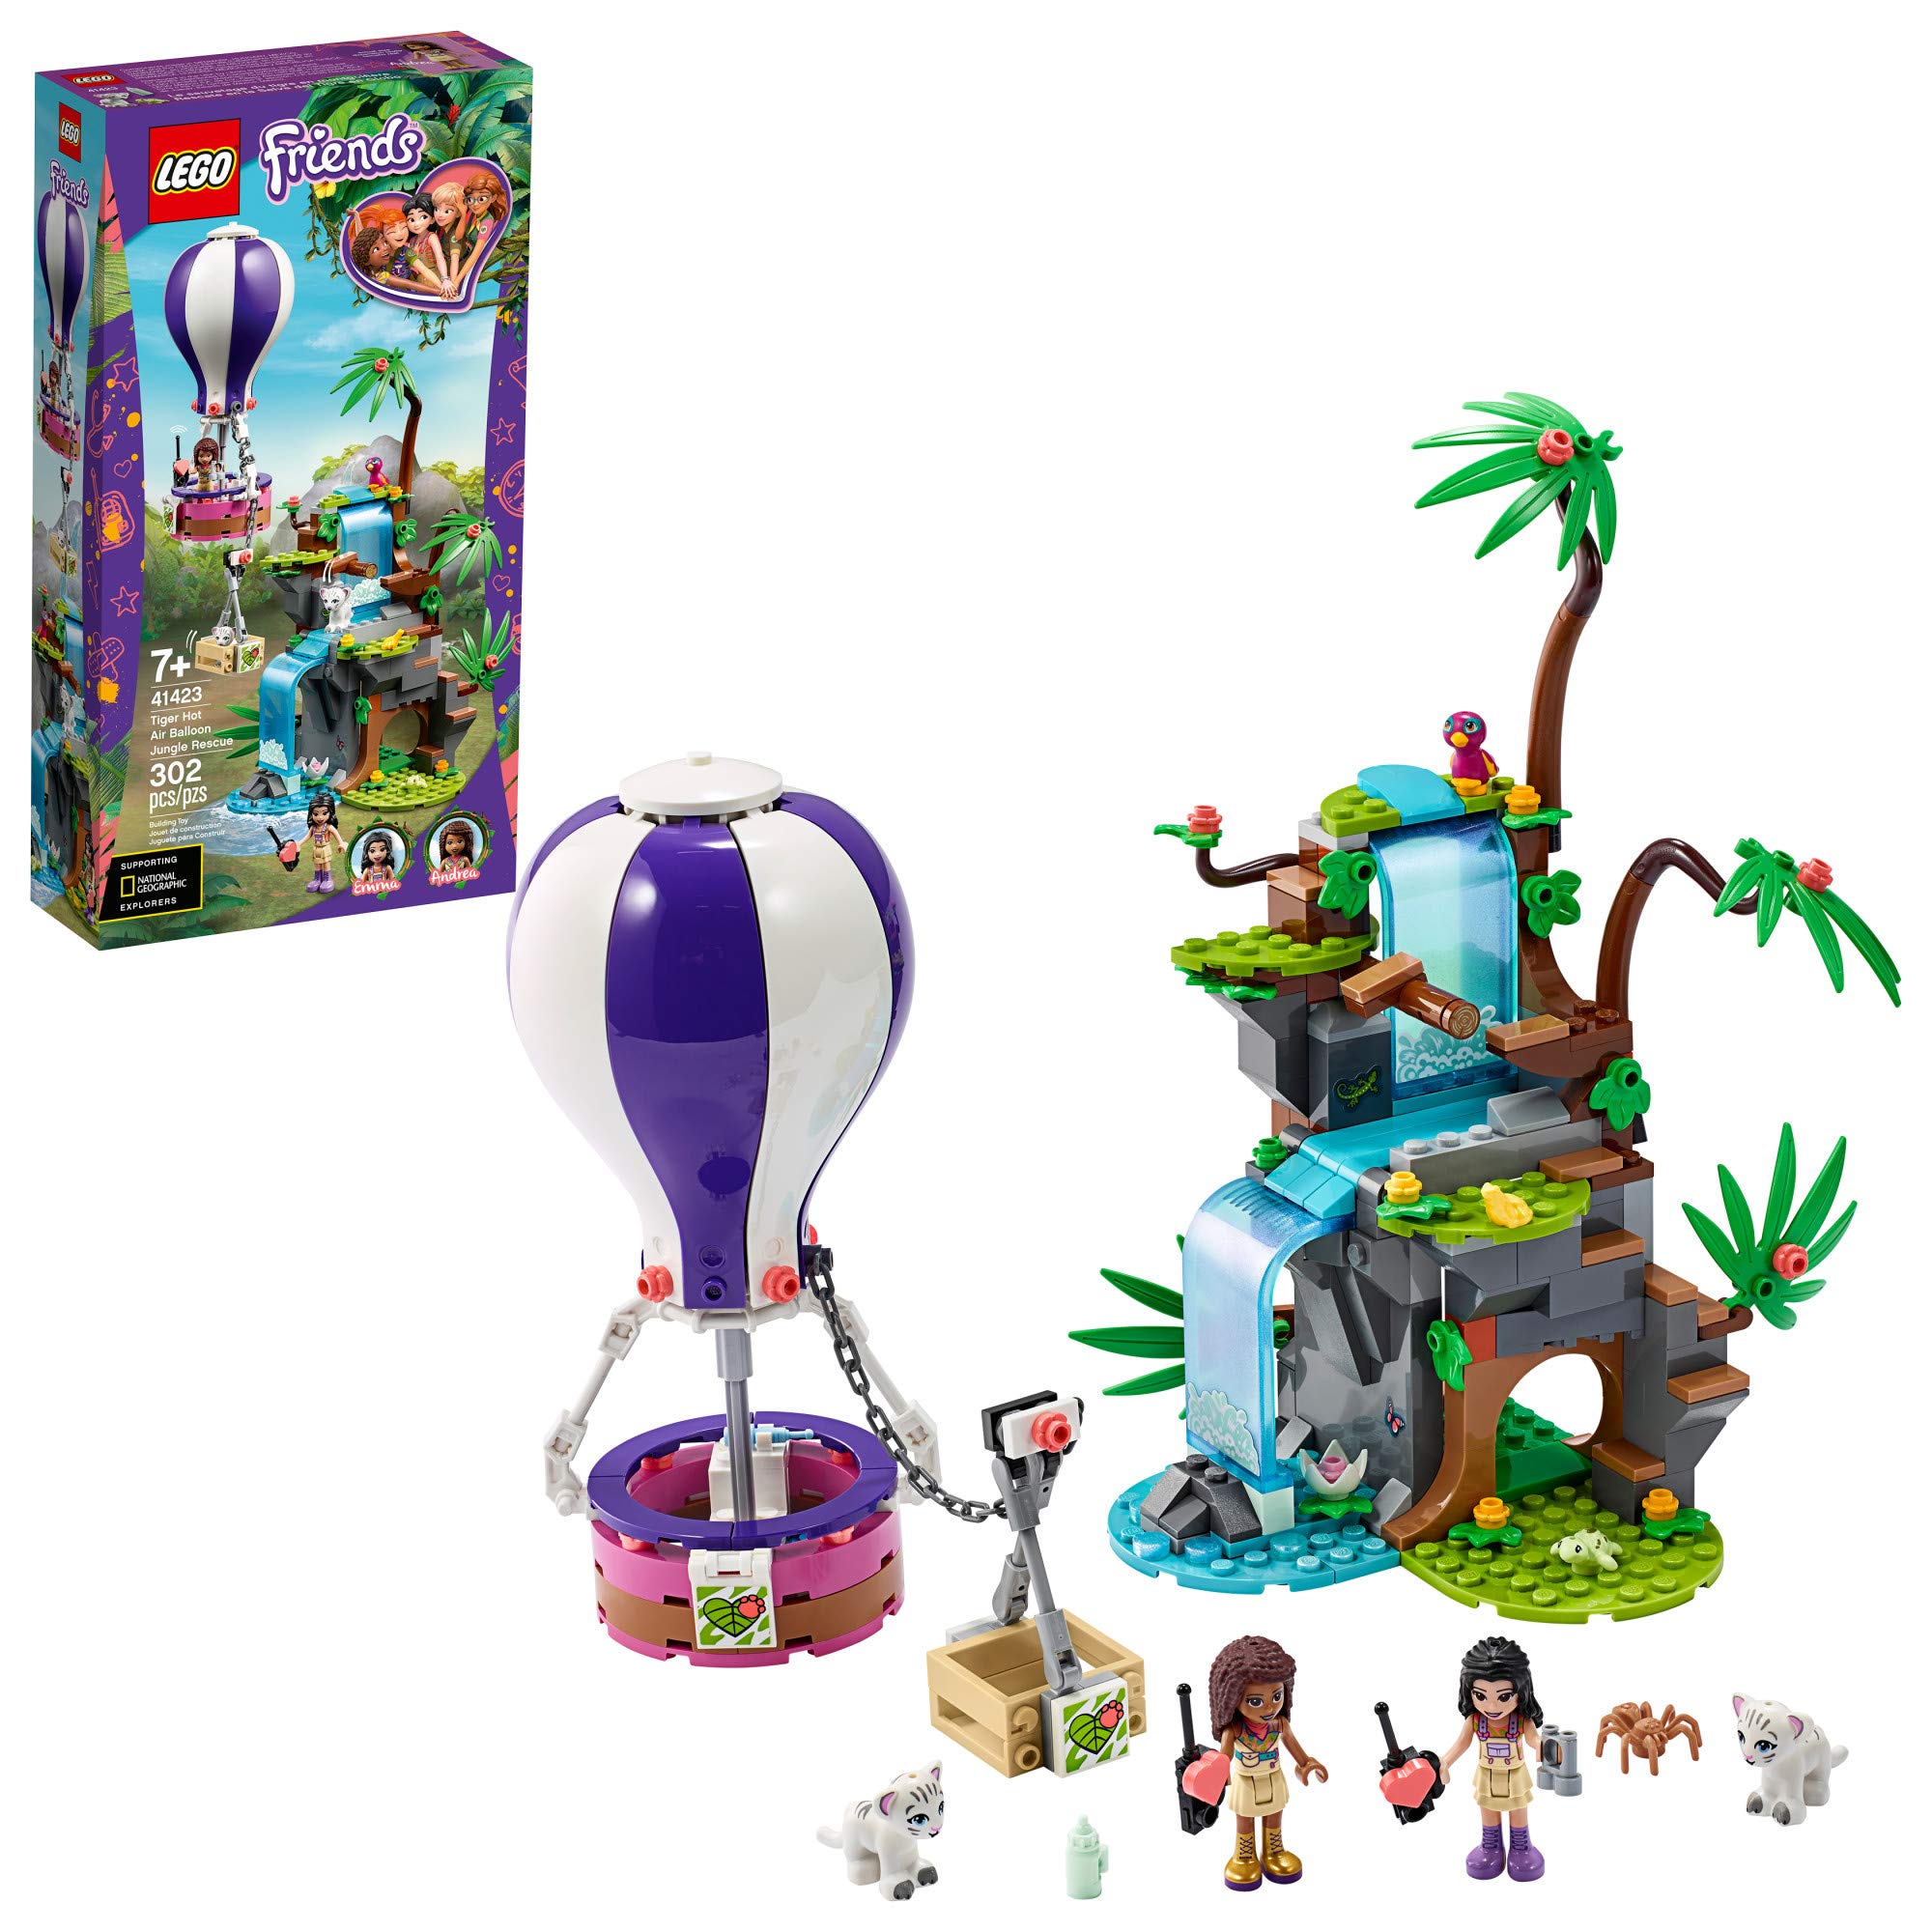 LEGO Friends Tiger Hot Air Balloon Jungle Rescue 41423 Friends Adventure Set Features a Toy Hot Air Balloon Friends Buildable Figures for Hours of Creative Fun (302 Pieces)